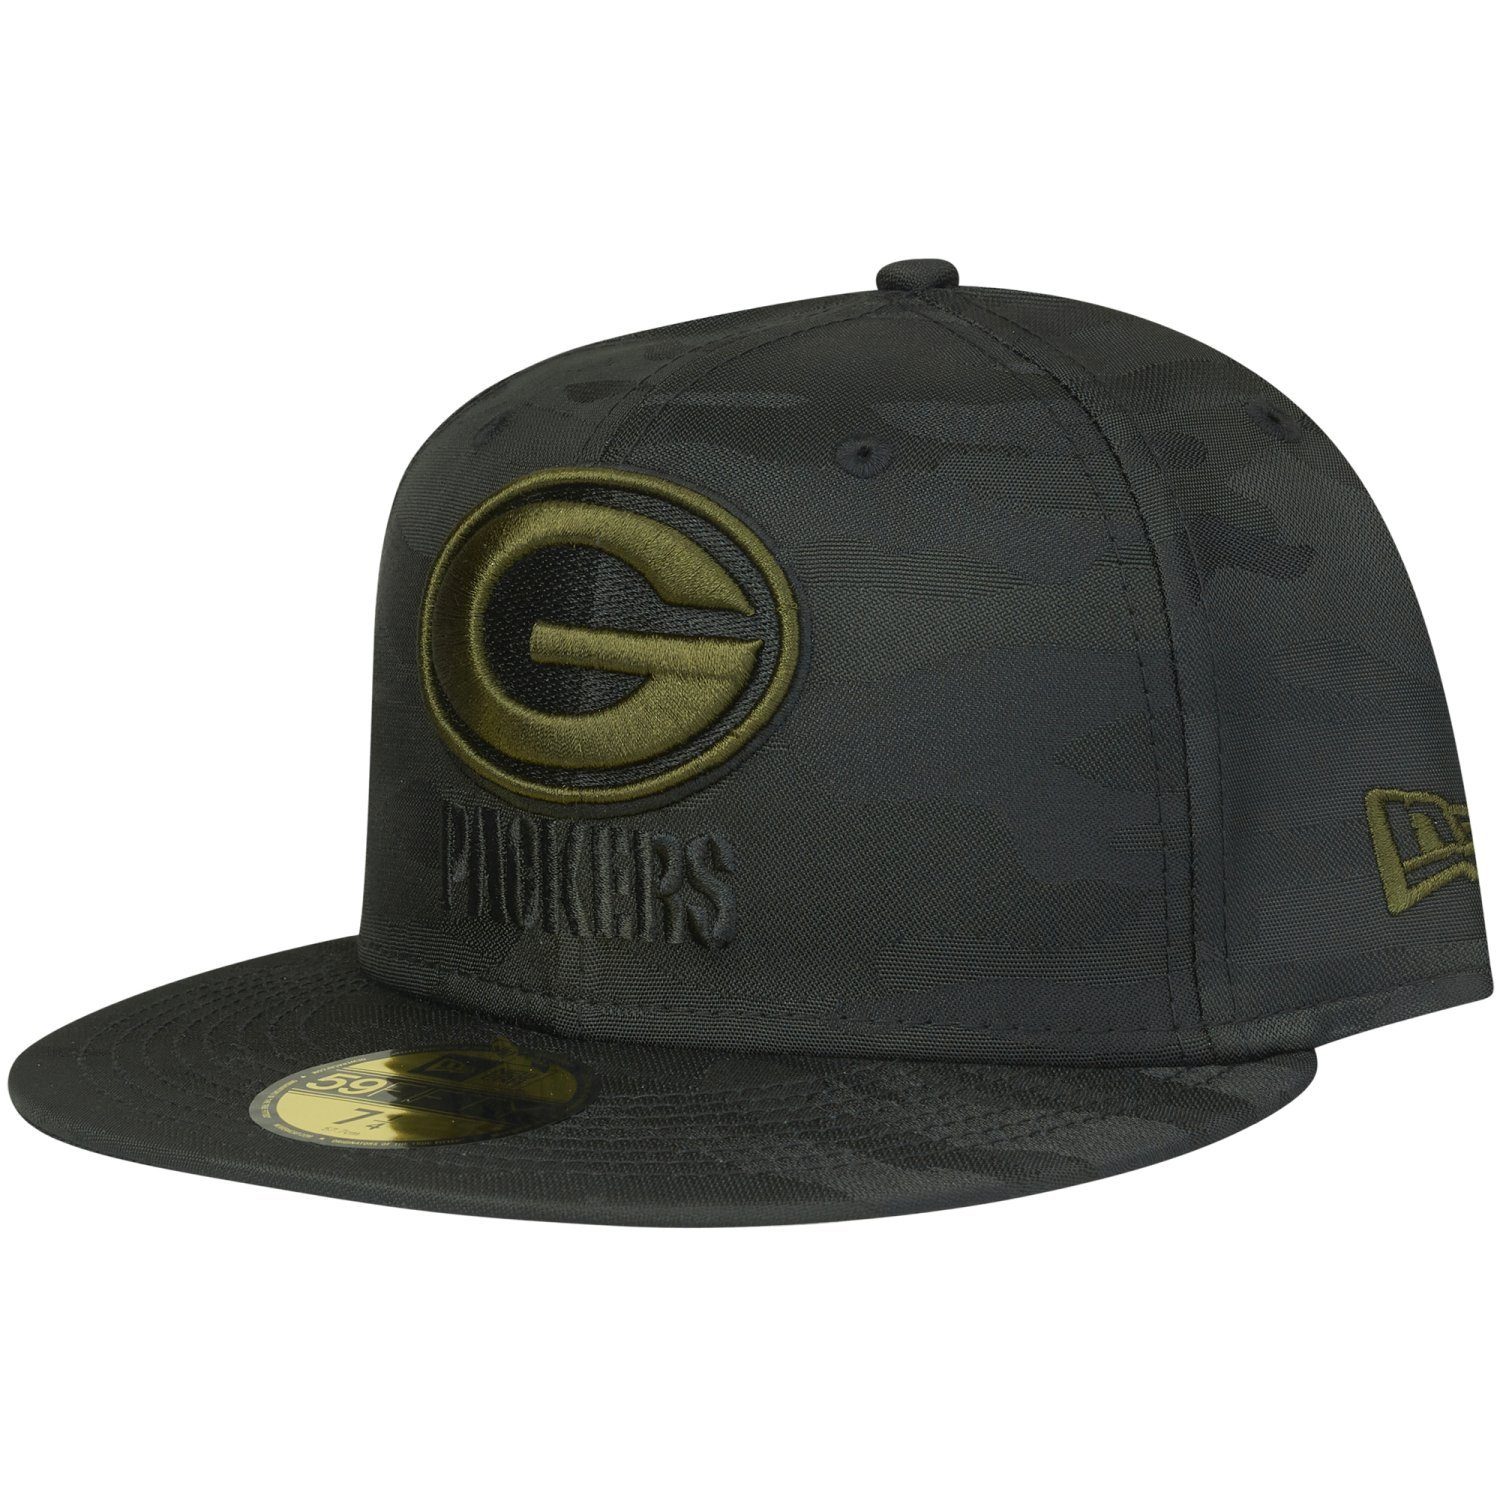 New Era Fitted Cap 59Fifty NFL TEAMS alpine Green Bay Packers